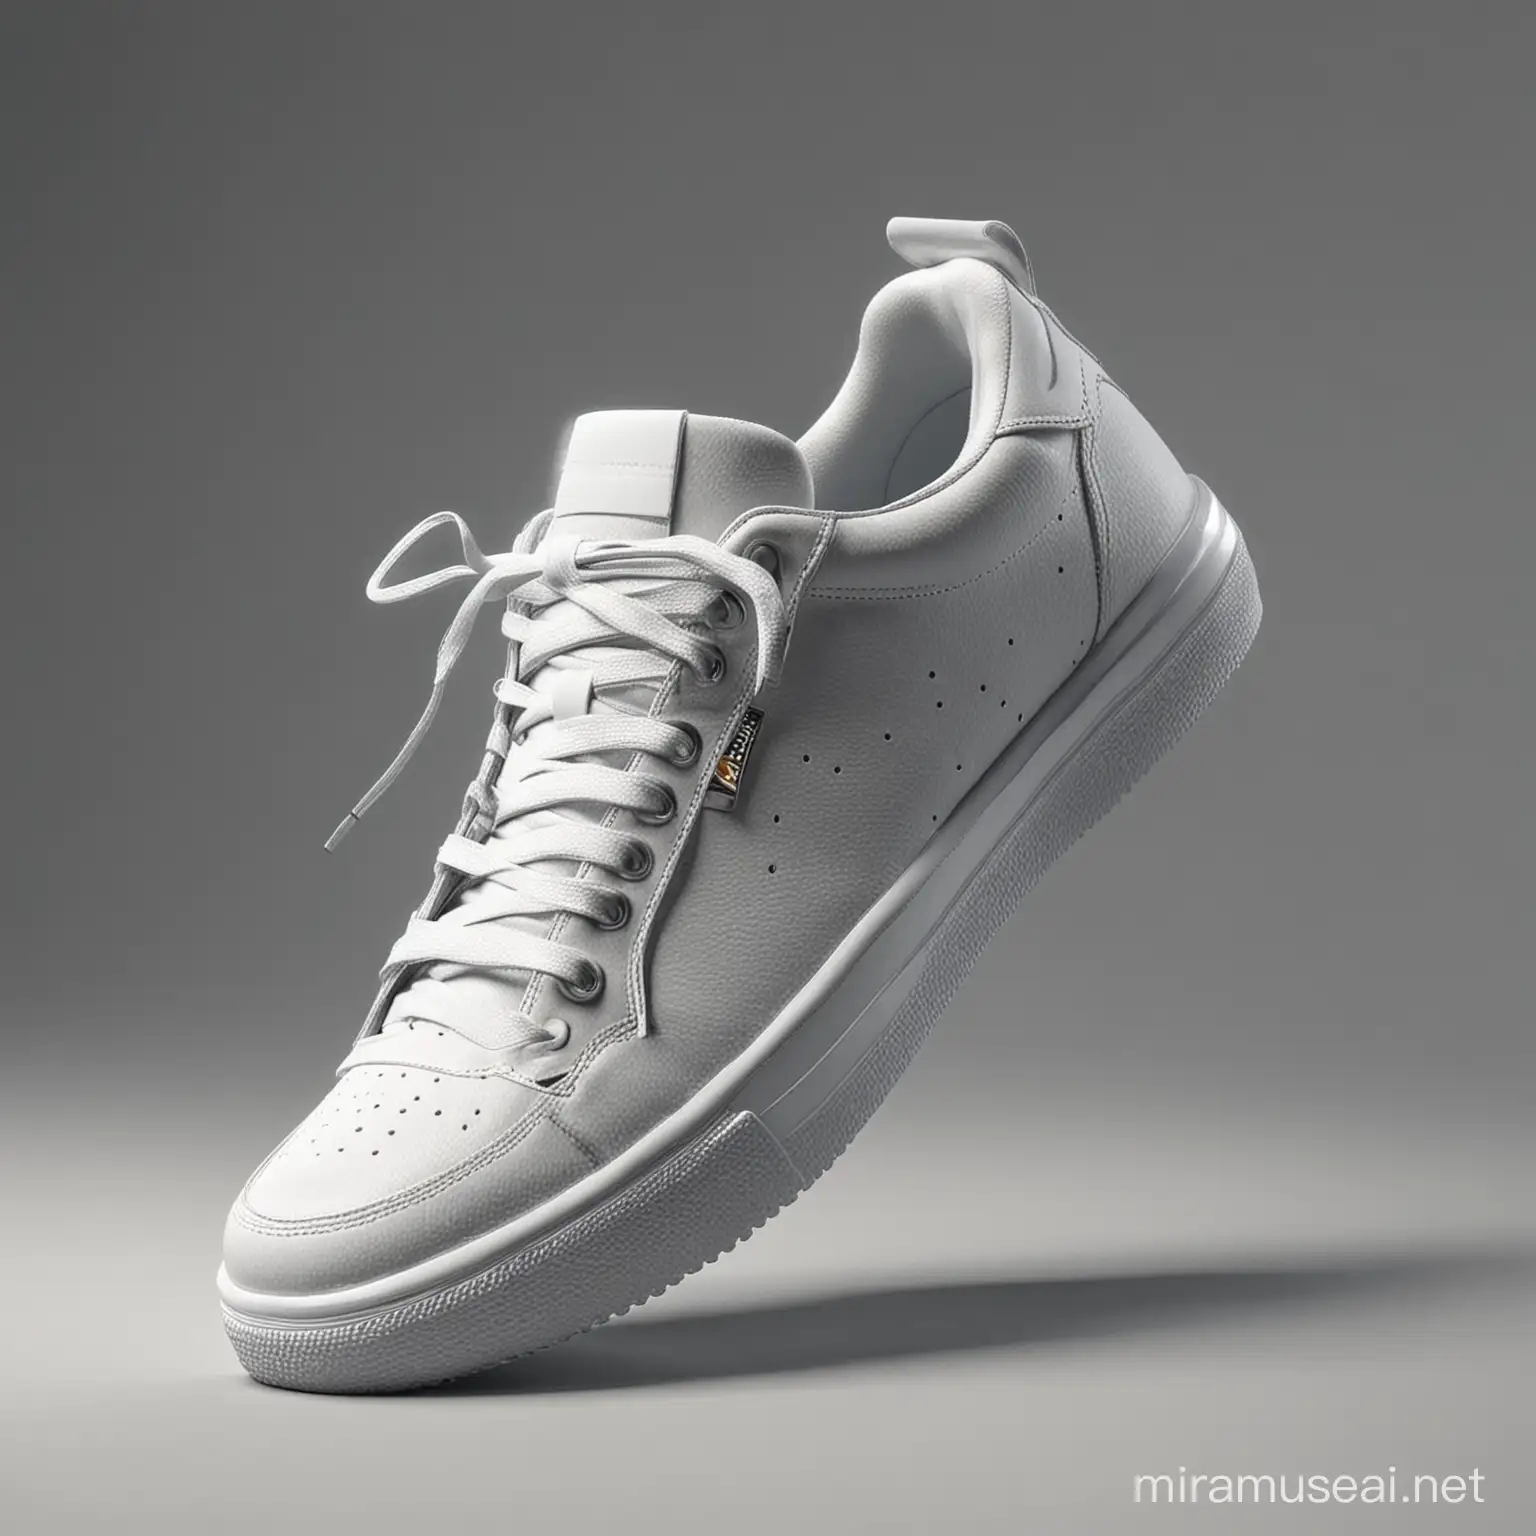 HighQuality 3D Photorealistic Sneakers Shoe Render in 4K Resolution